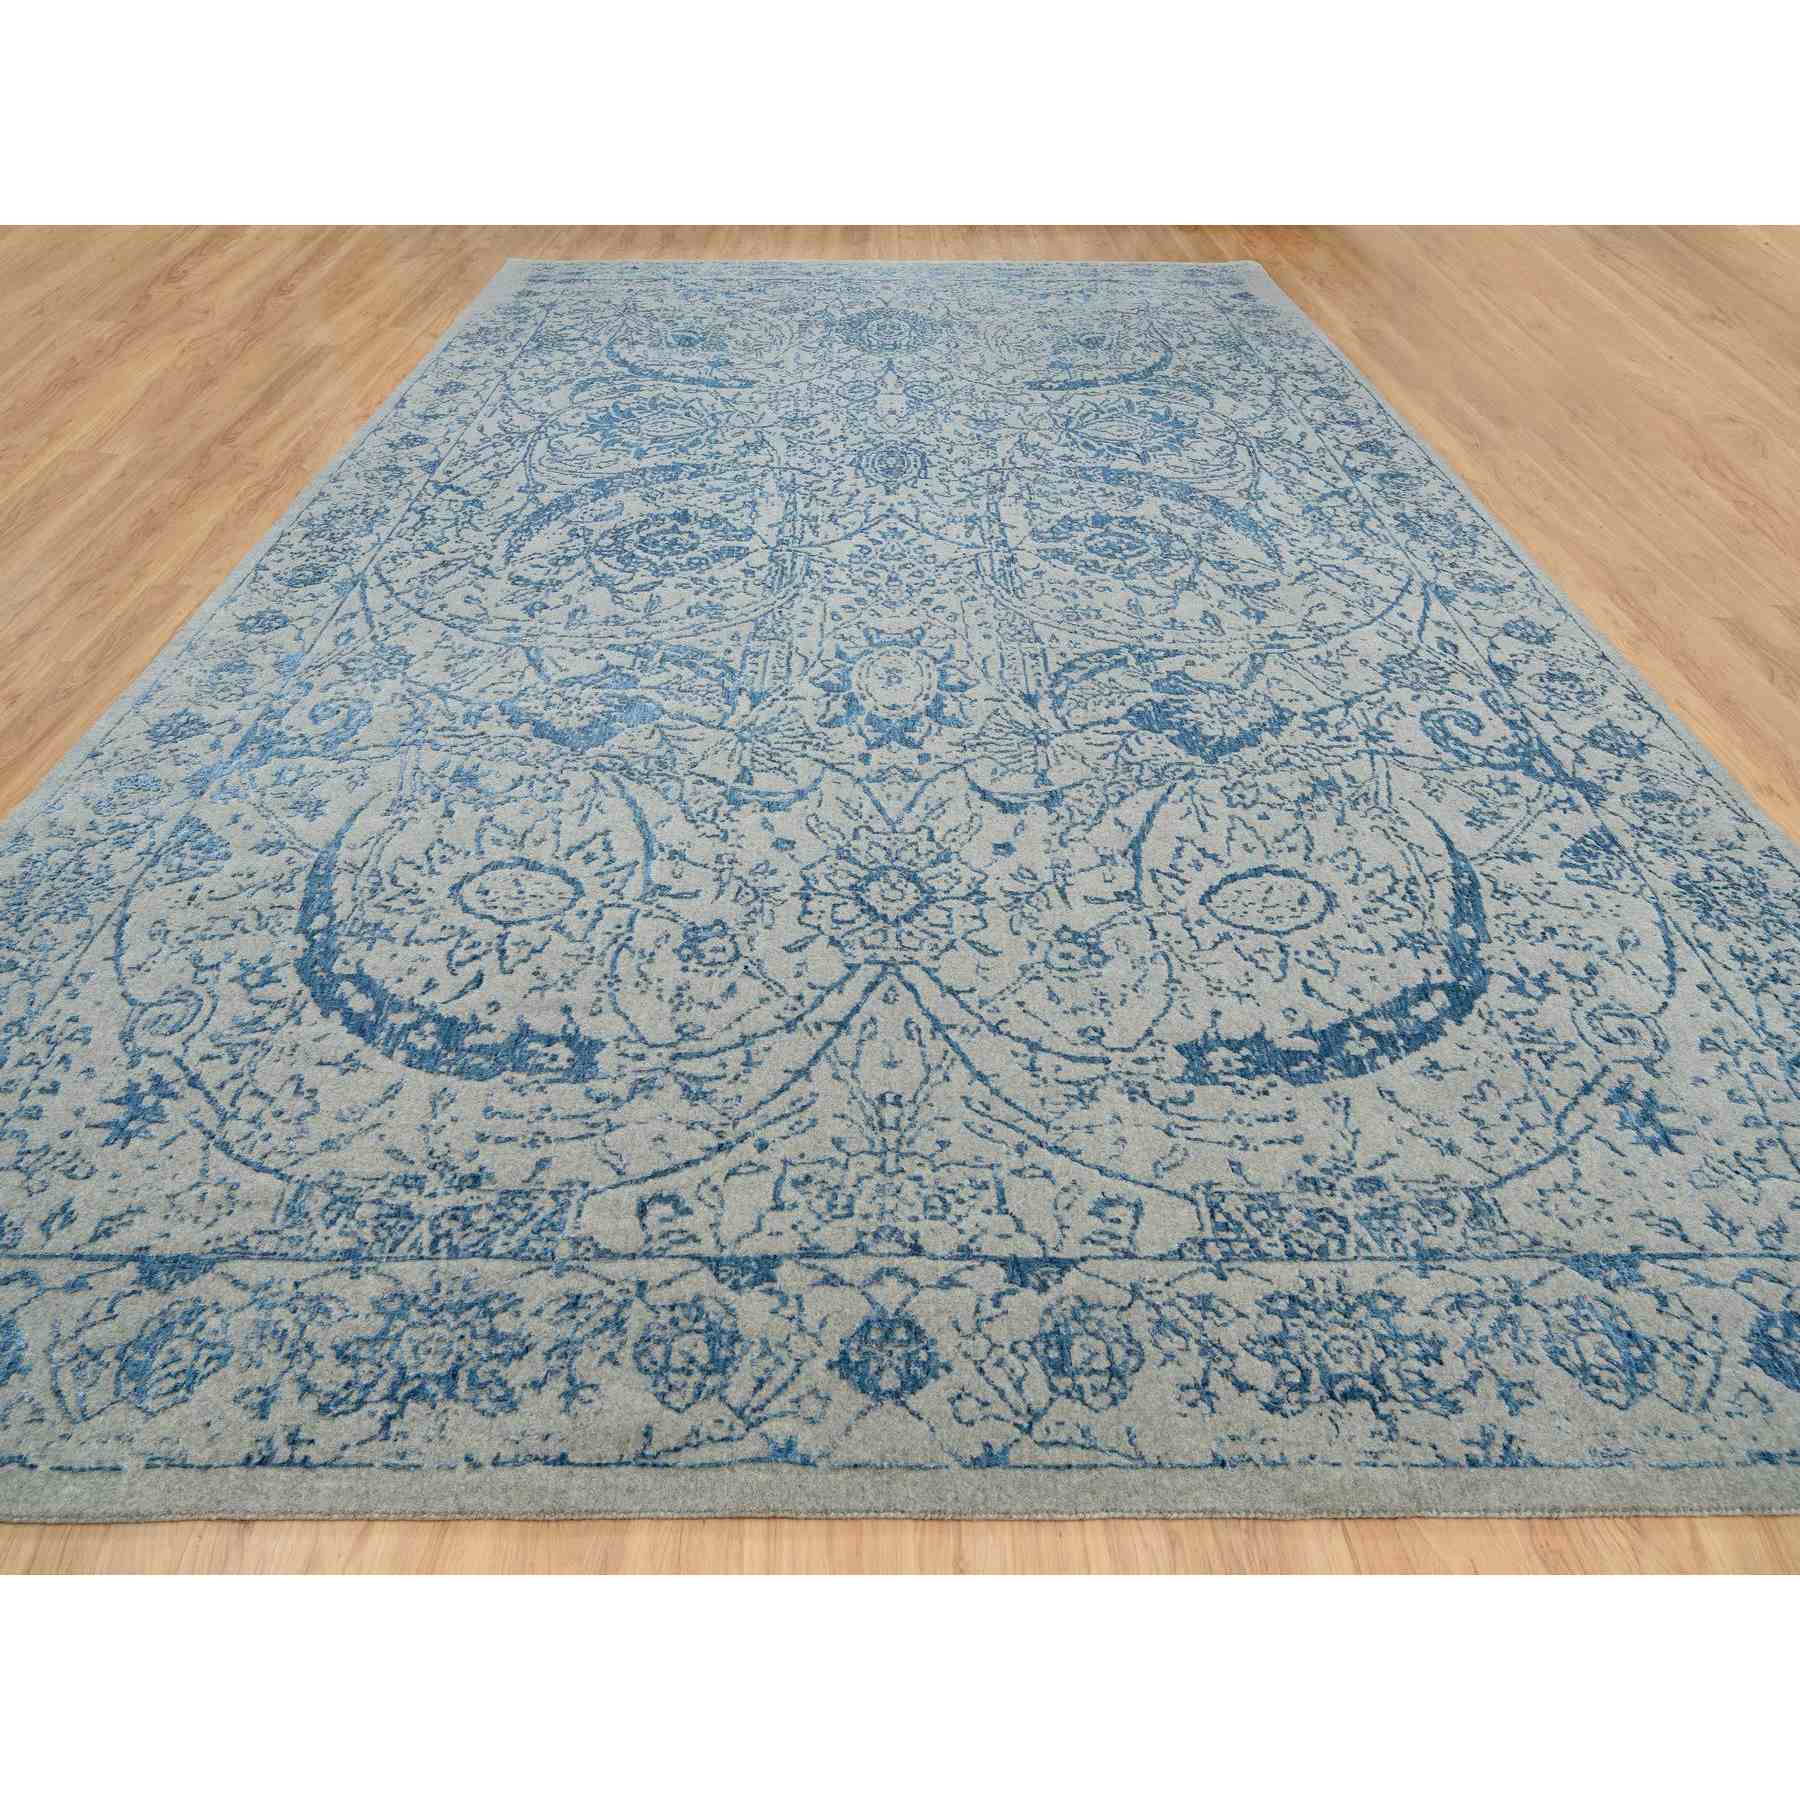 Transitional-Hand-Loomed-Rug-319115